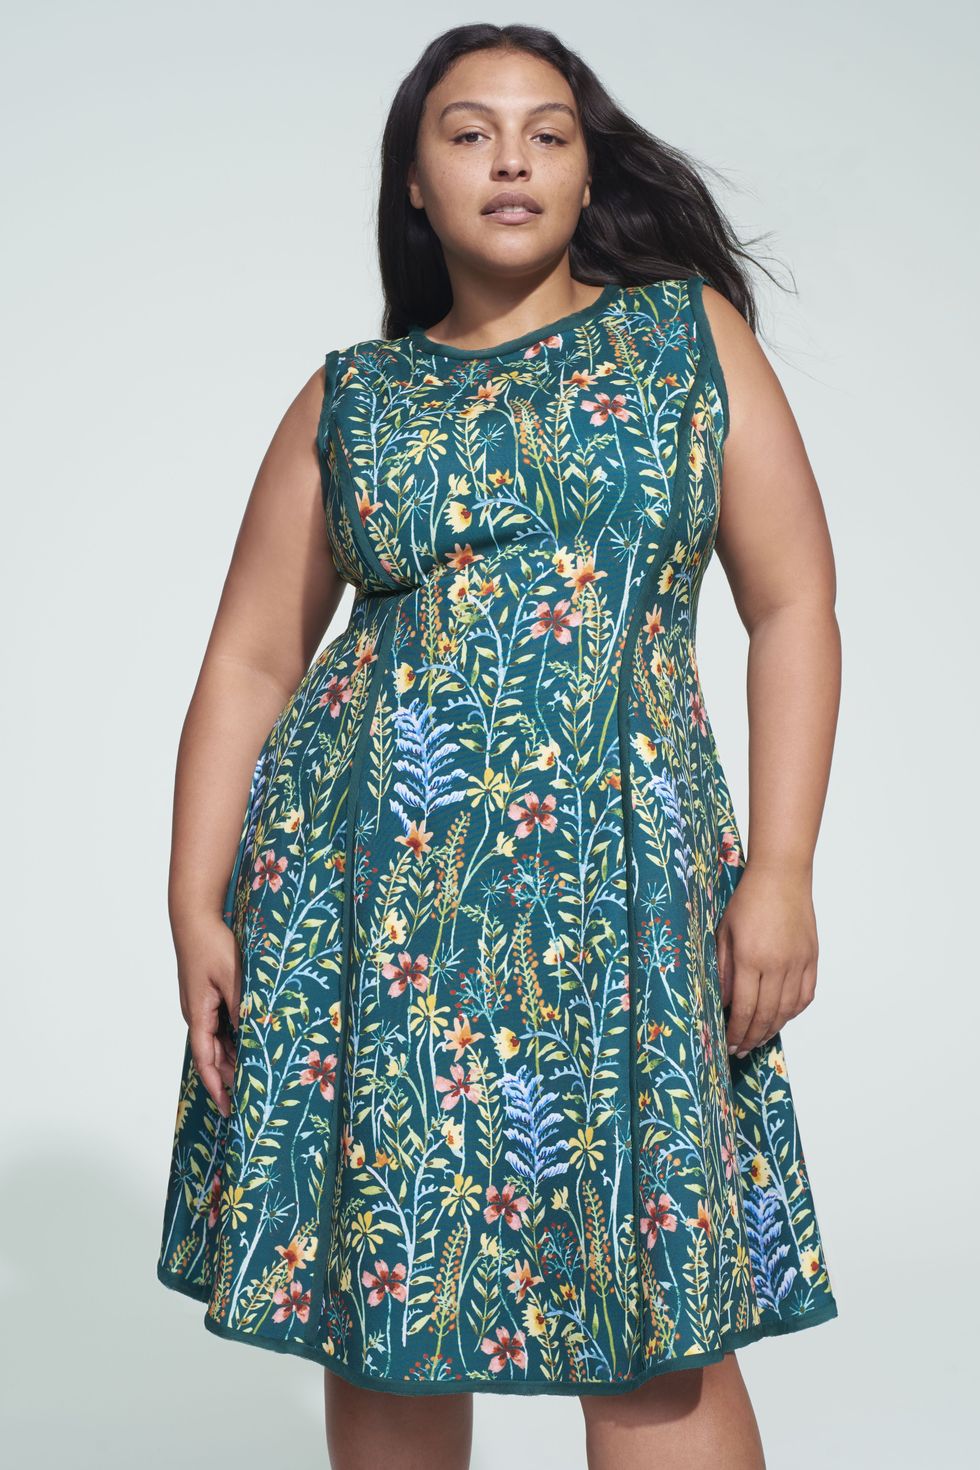 Jason Wu's Plus-Size Collection Is Dropping Just In Time For The Holidays